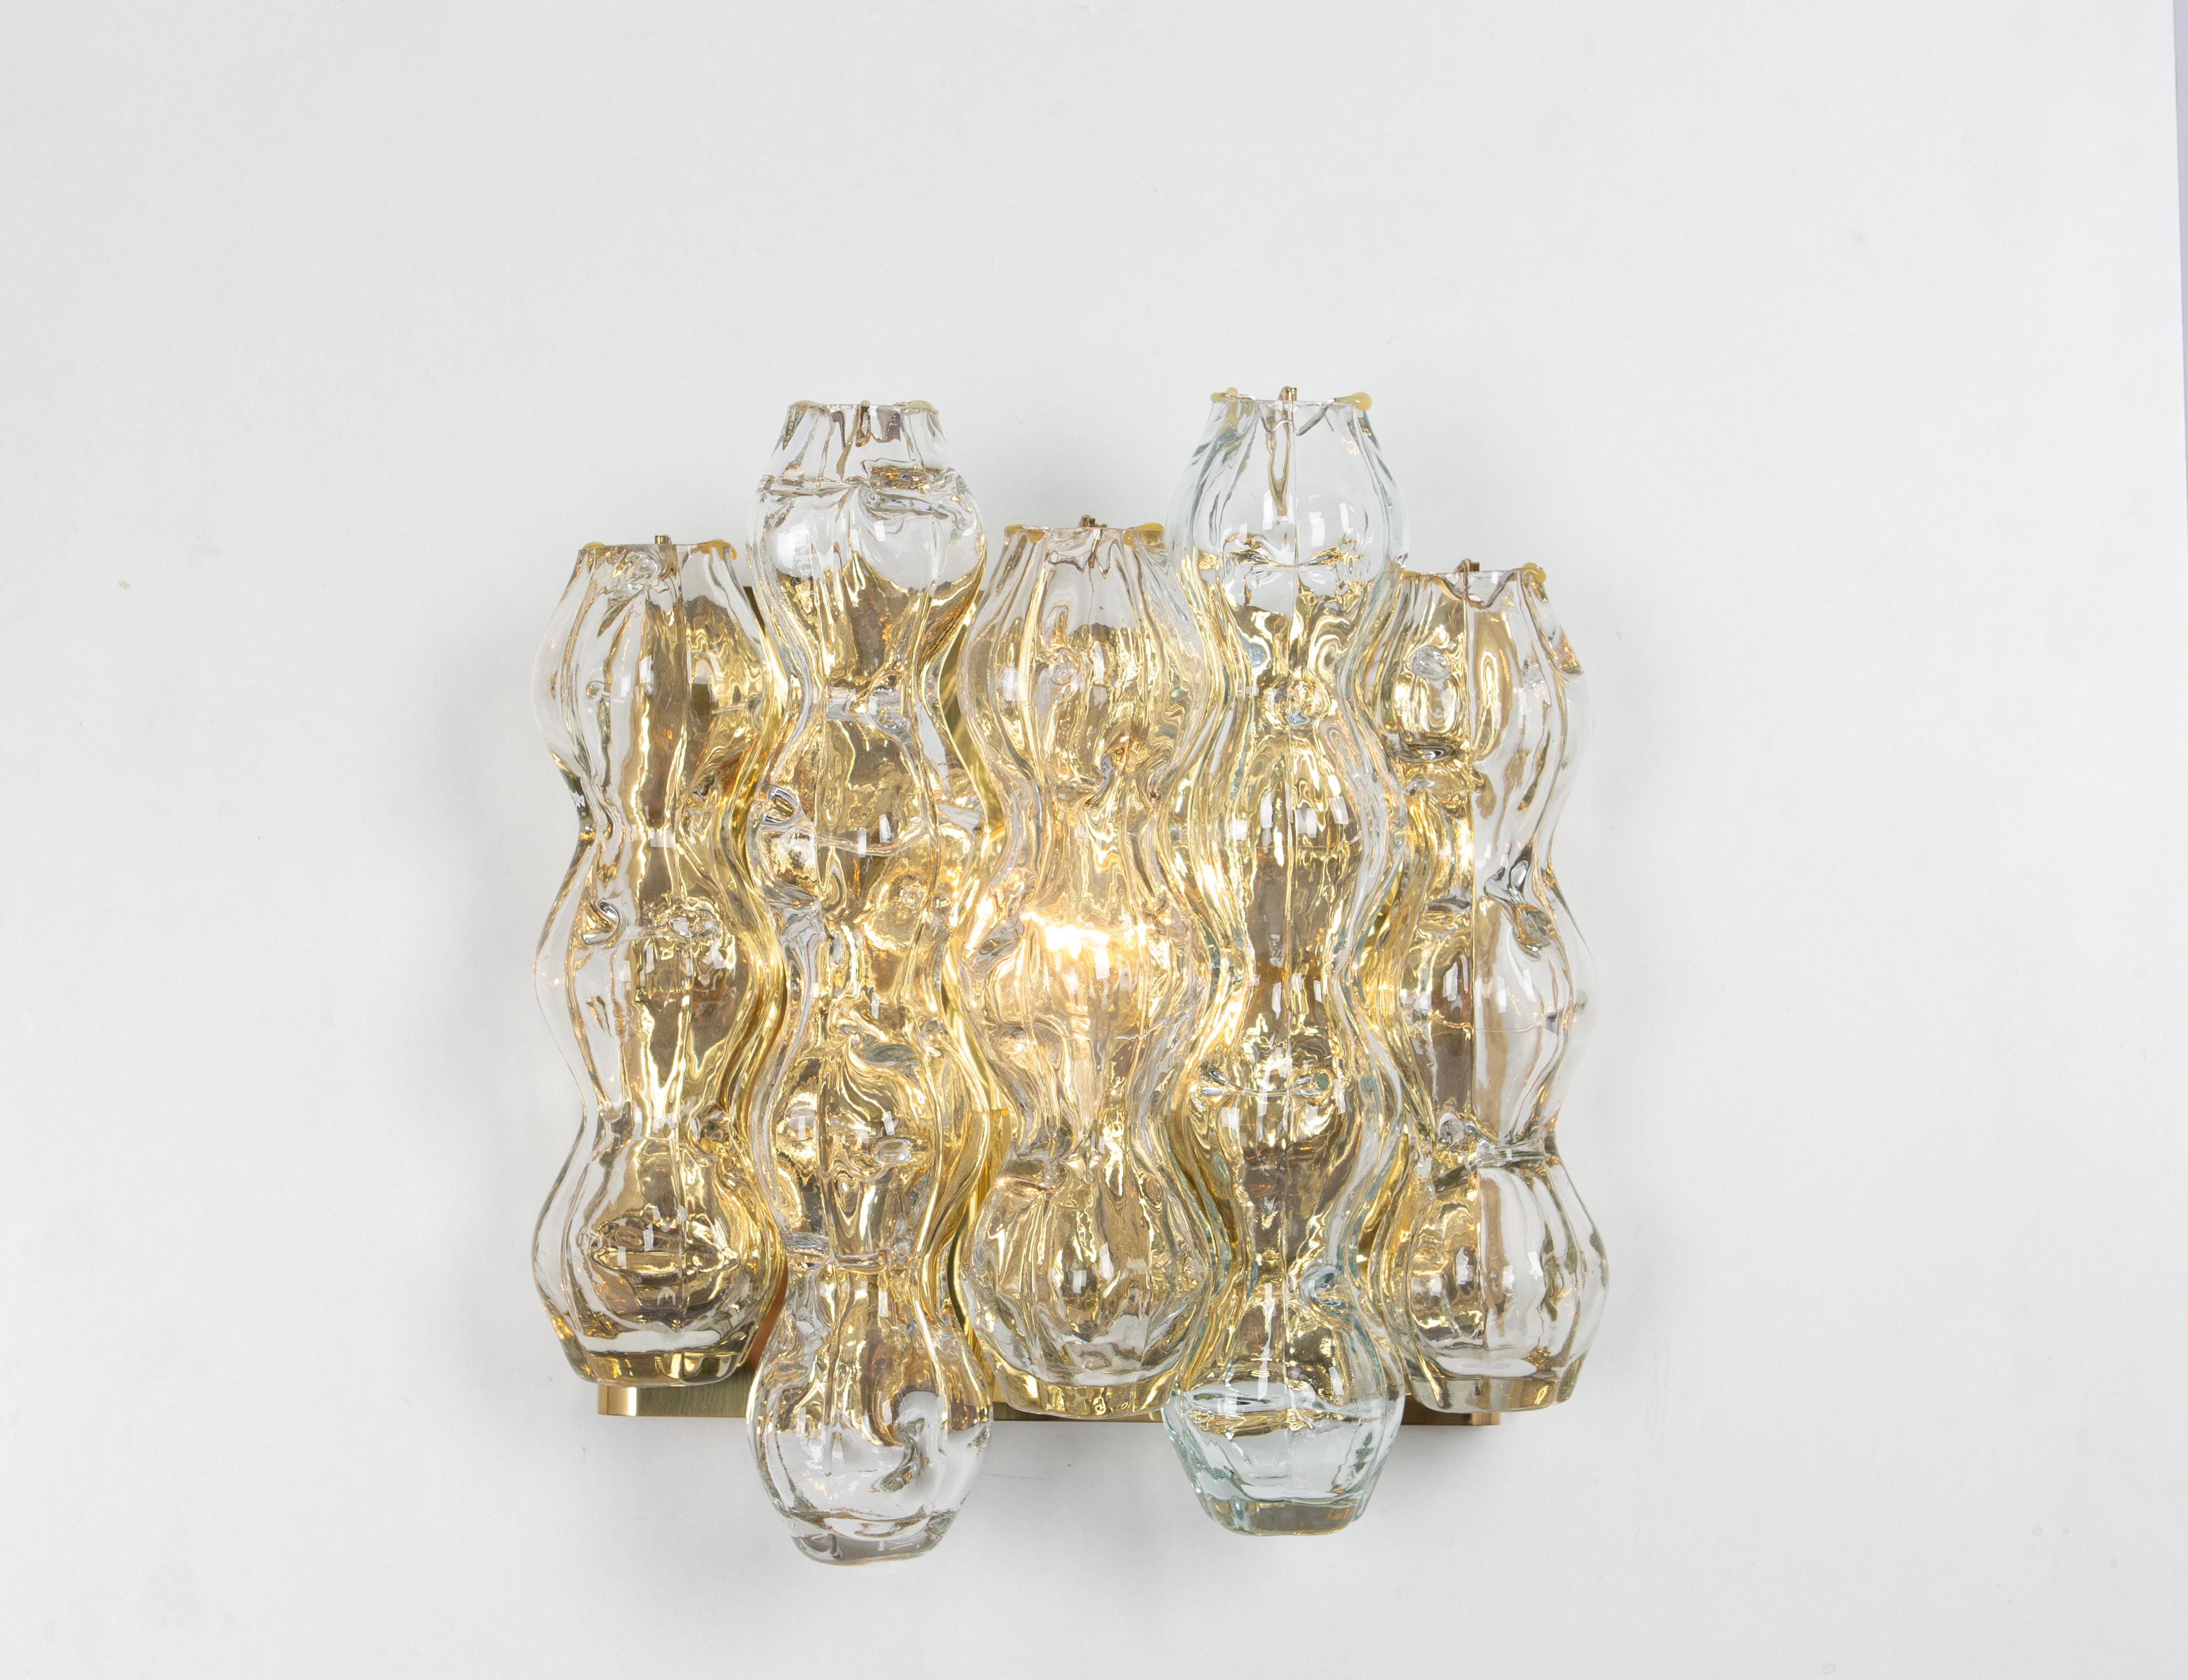 Pair of Large Murano Glass Wall Sconces by Doria, Germany, 1960s For Sale 2